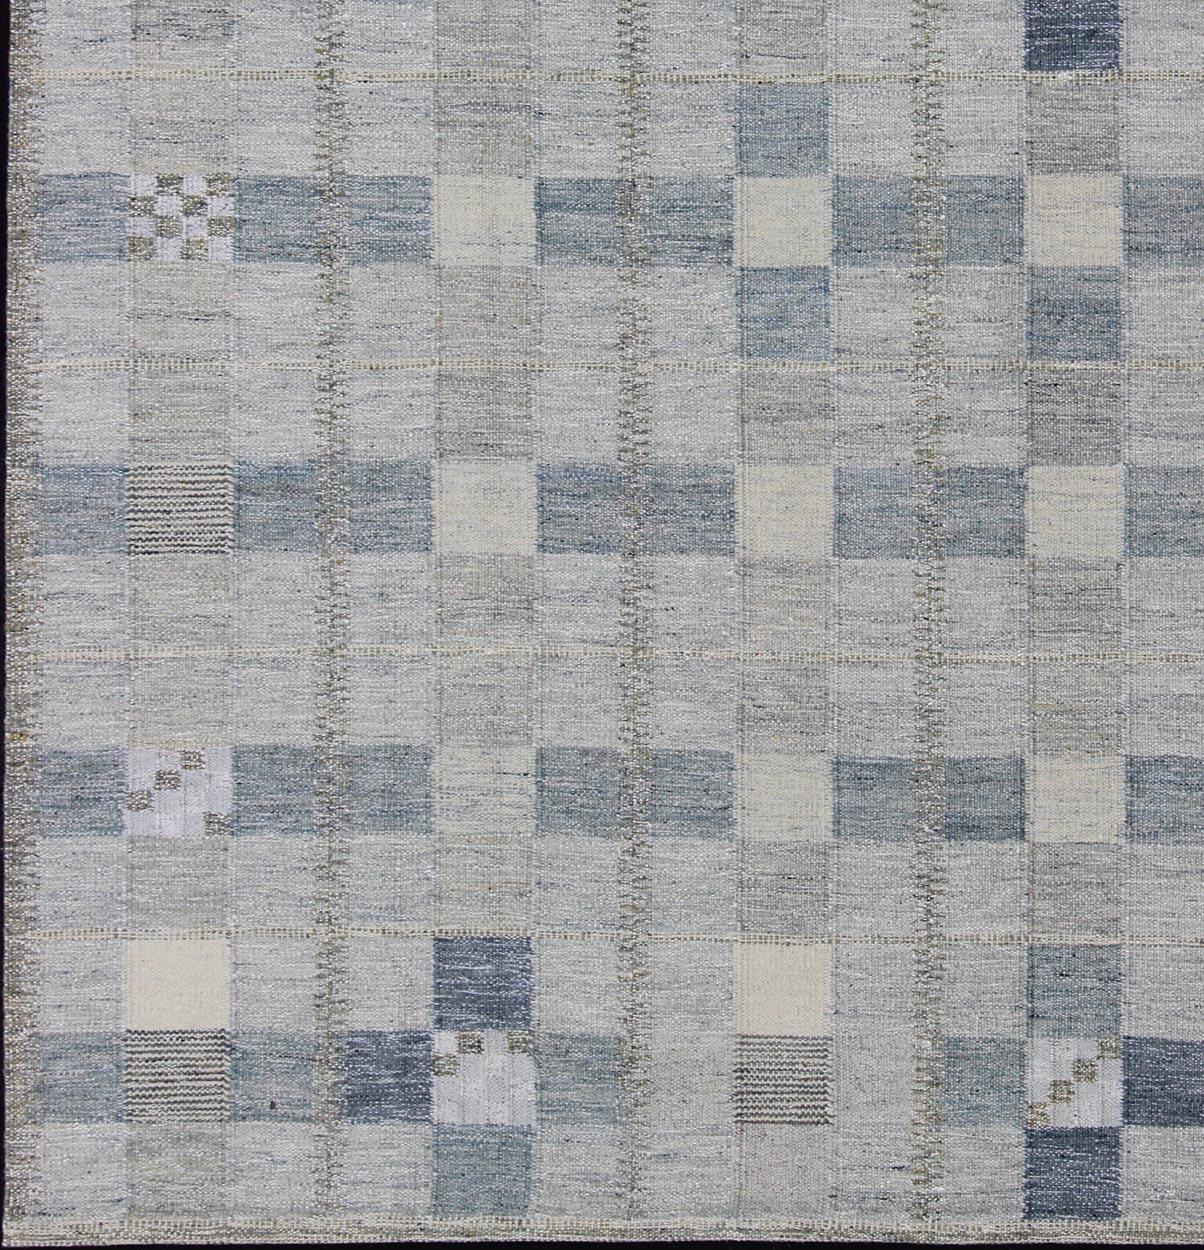 Gray and blue Scandinavian flat-weave design rug with geometric design, rug rjk-18844-shb-137-01, country of origin / type: India / Scandinavian flat-weave.

This Scandinavian flat-weave is inspired by the work of Swedish textile designers of the